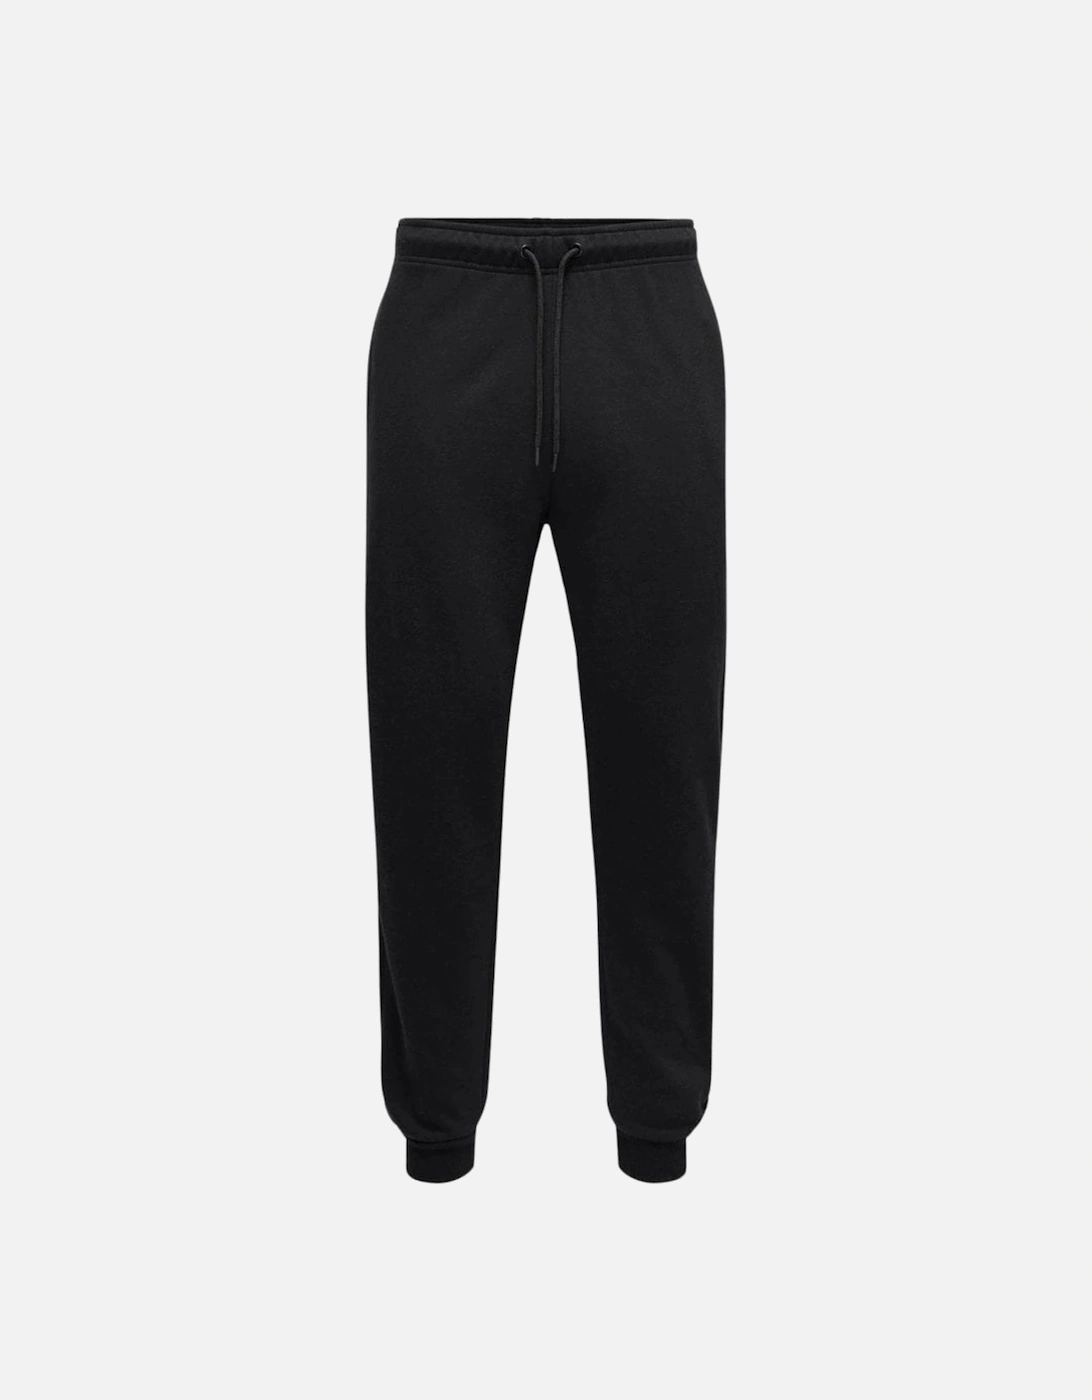 Ceres Joggers - Black, 8 of 7